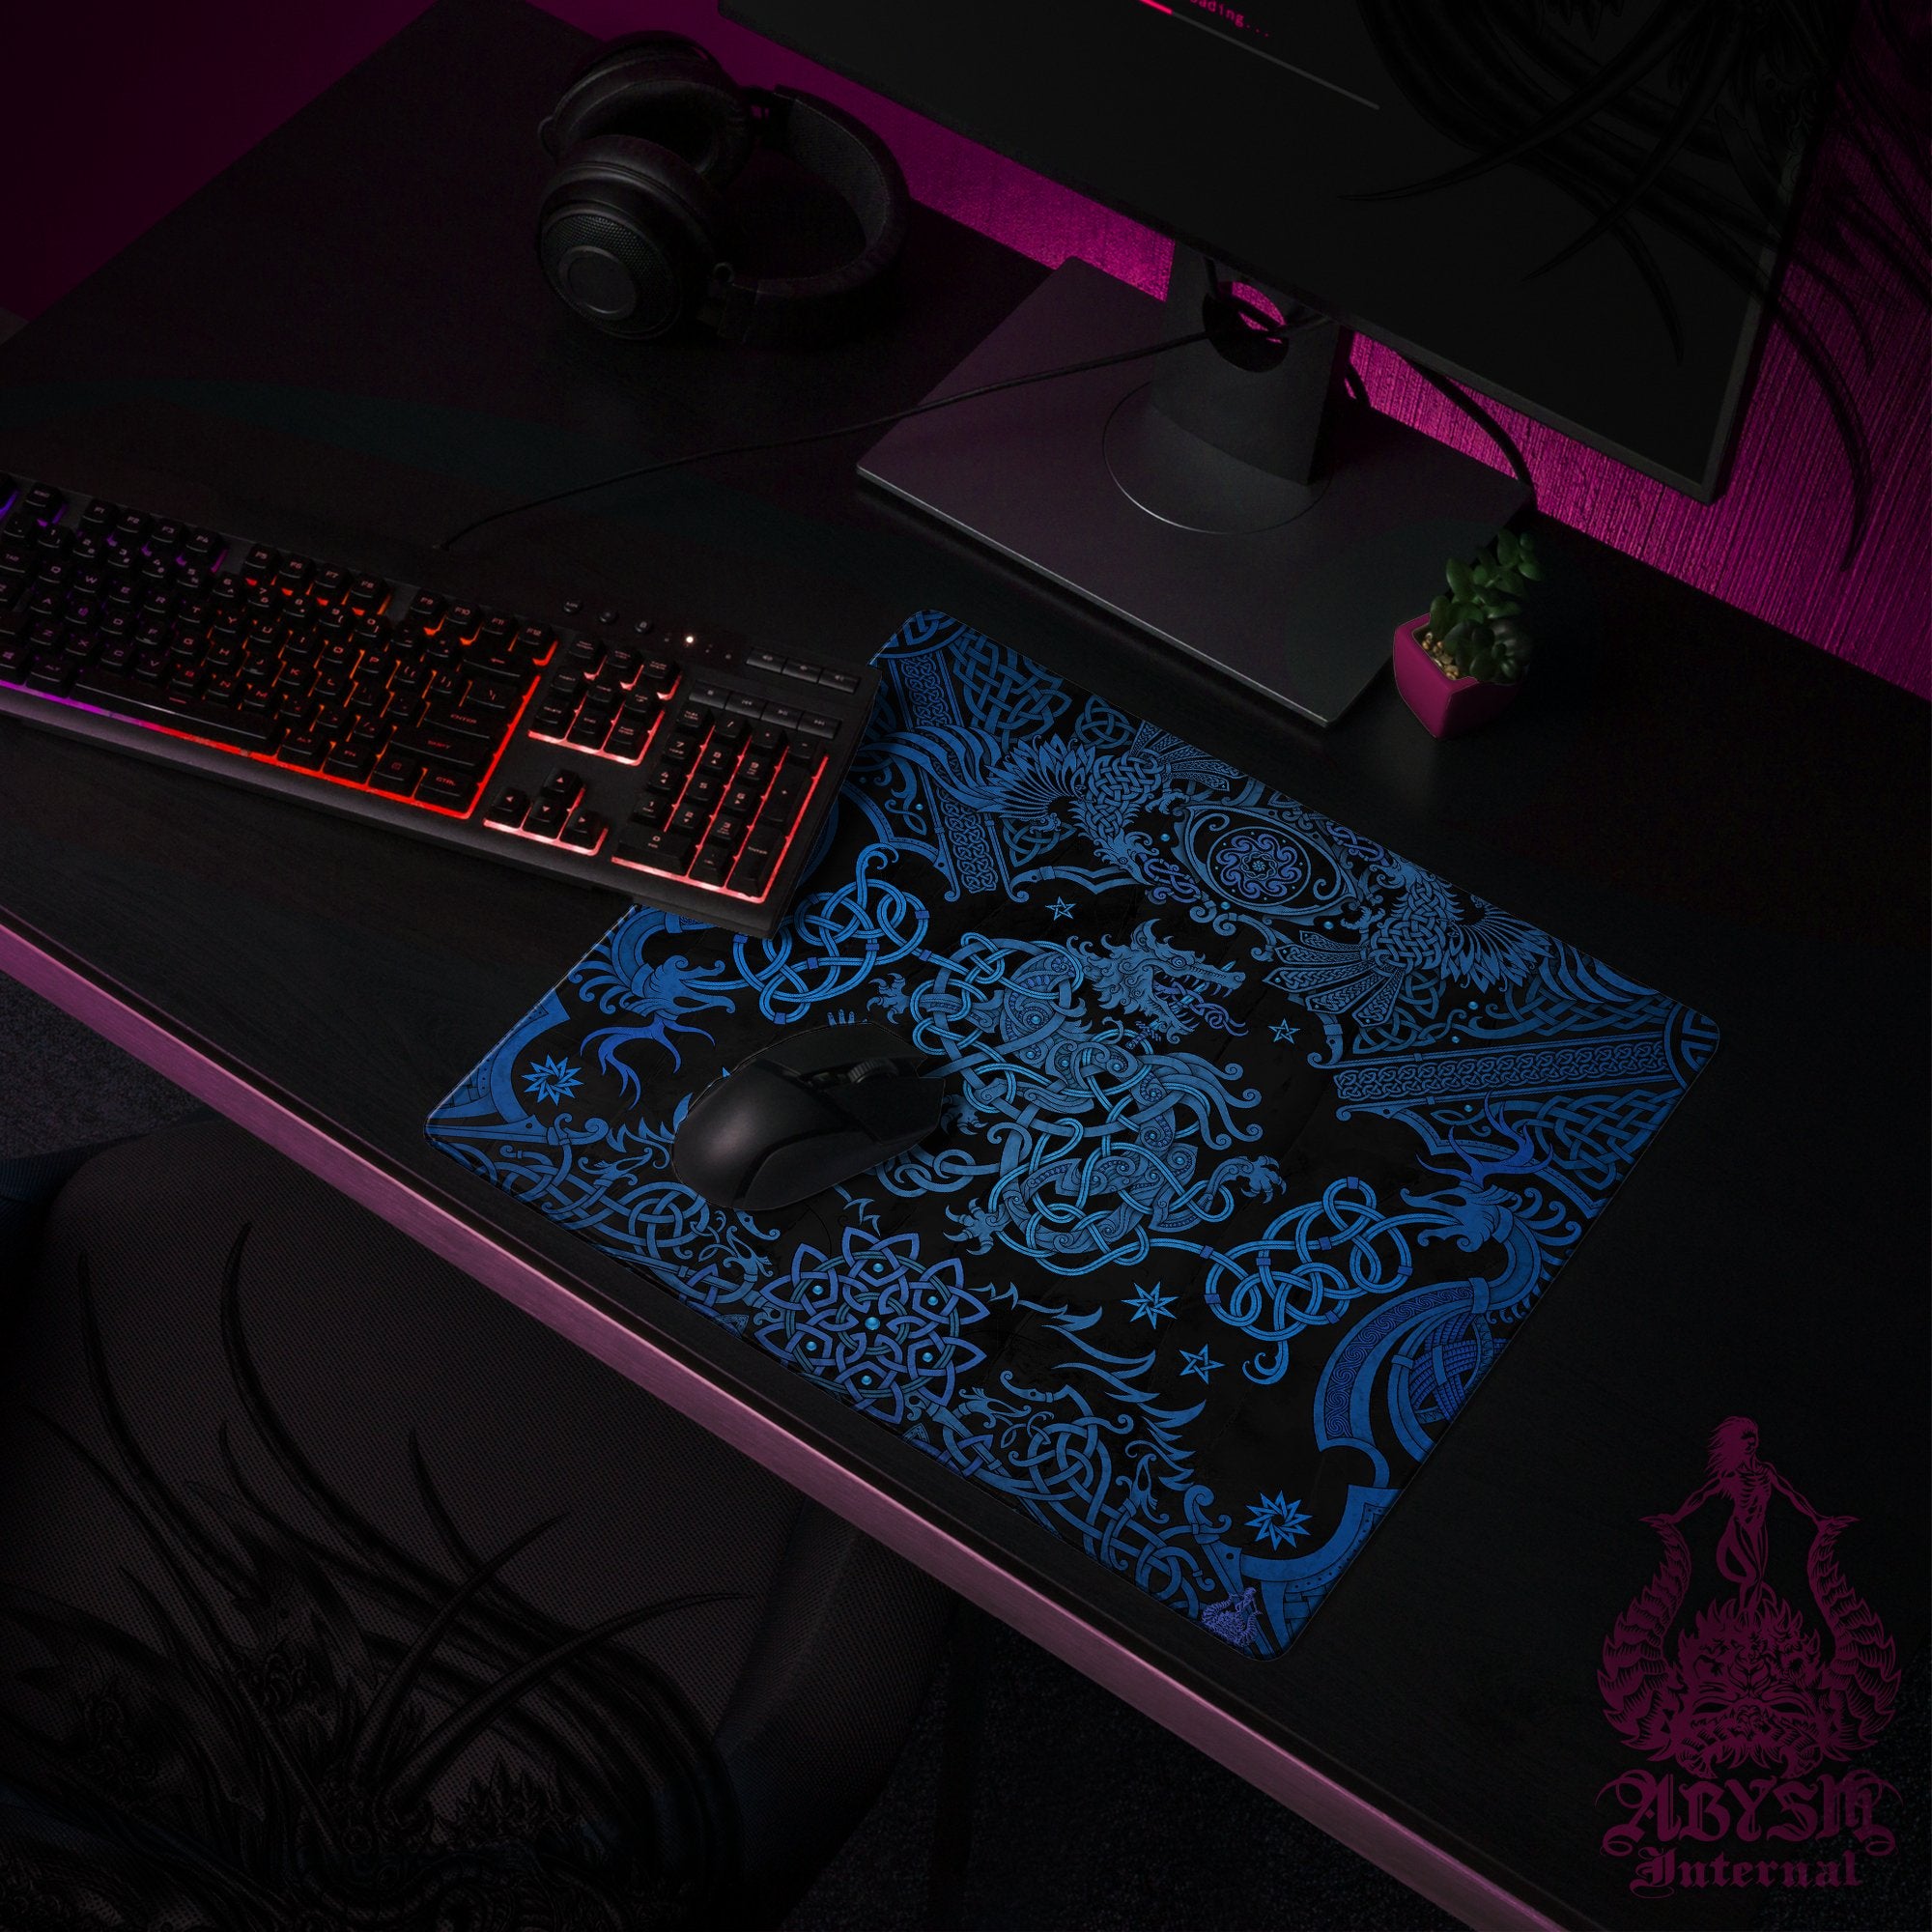 Fenrir Gaming Desk Mat, Viking Mouse Pad, Nordic Knotwork Table Protector Cover, Norse Wolf Workpad, Art Print - Black Blue - Abysm Internal